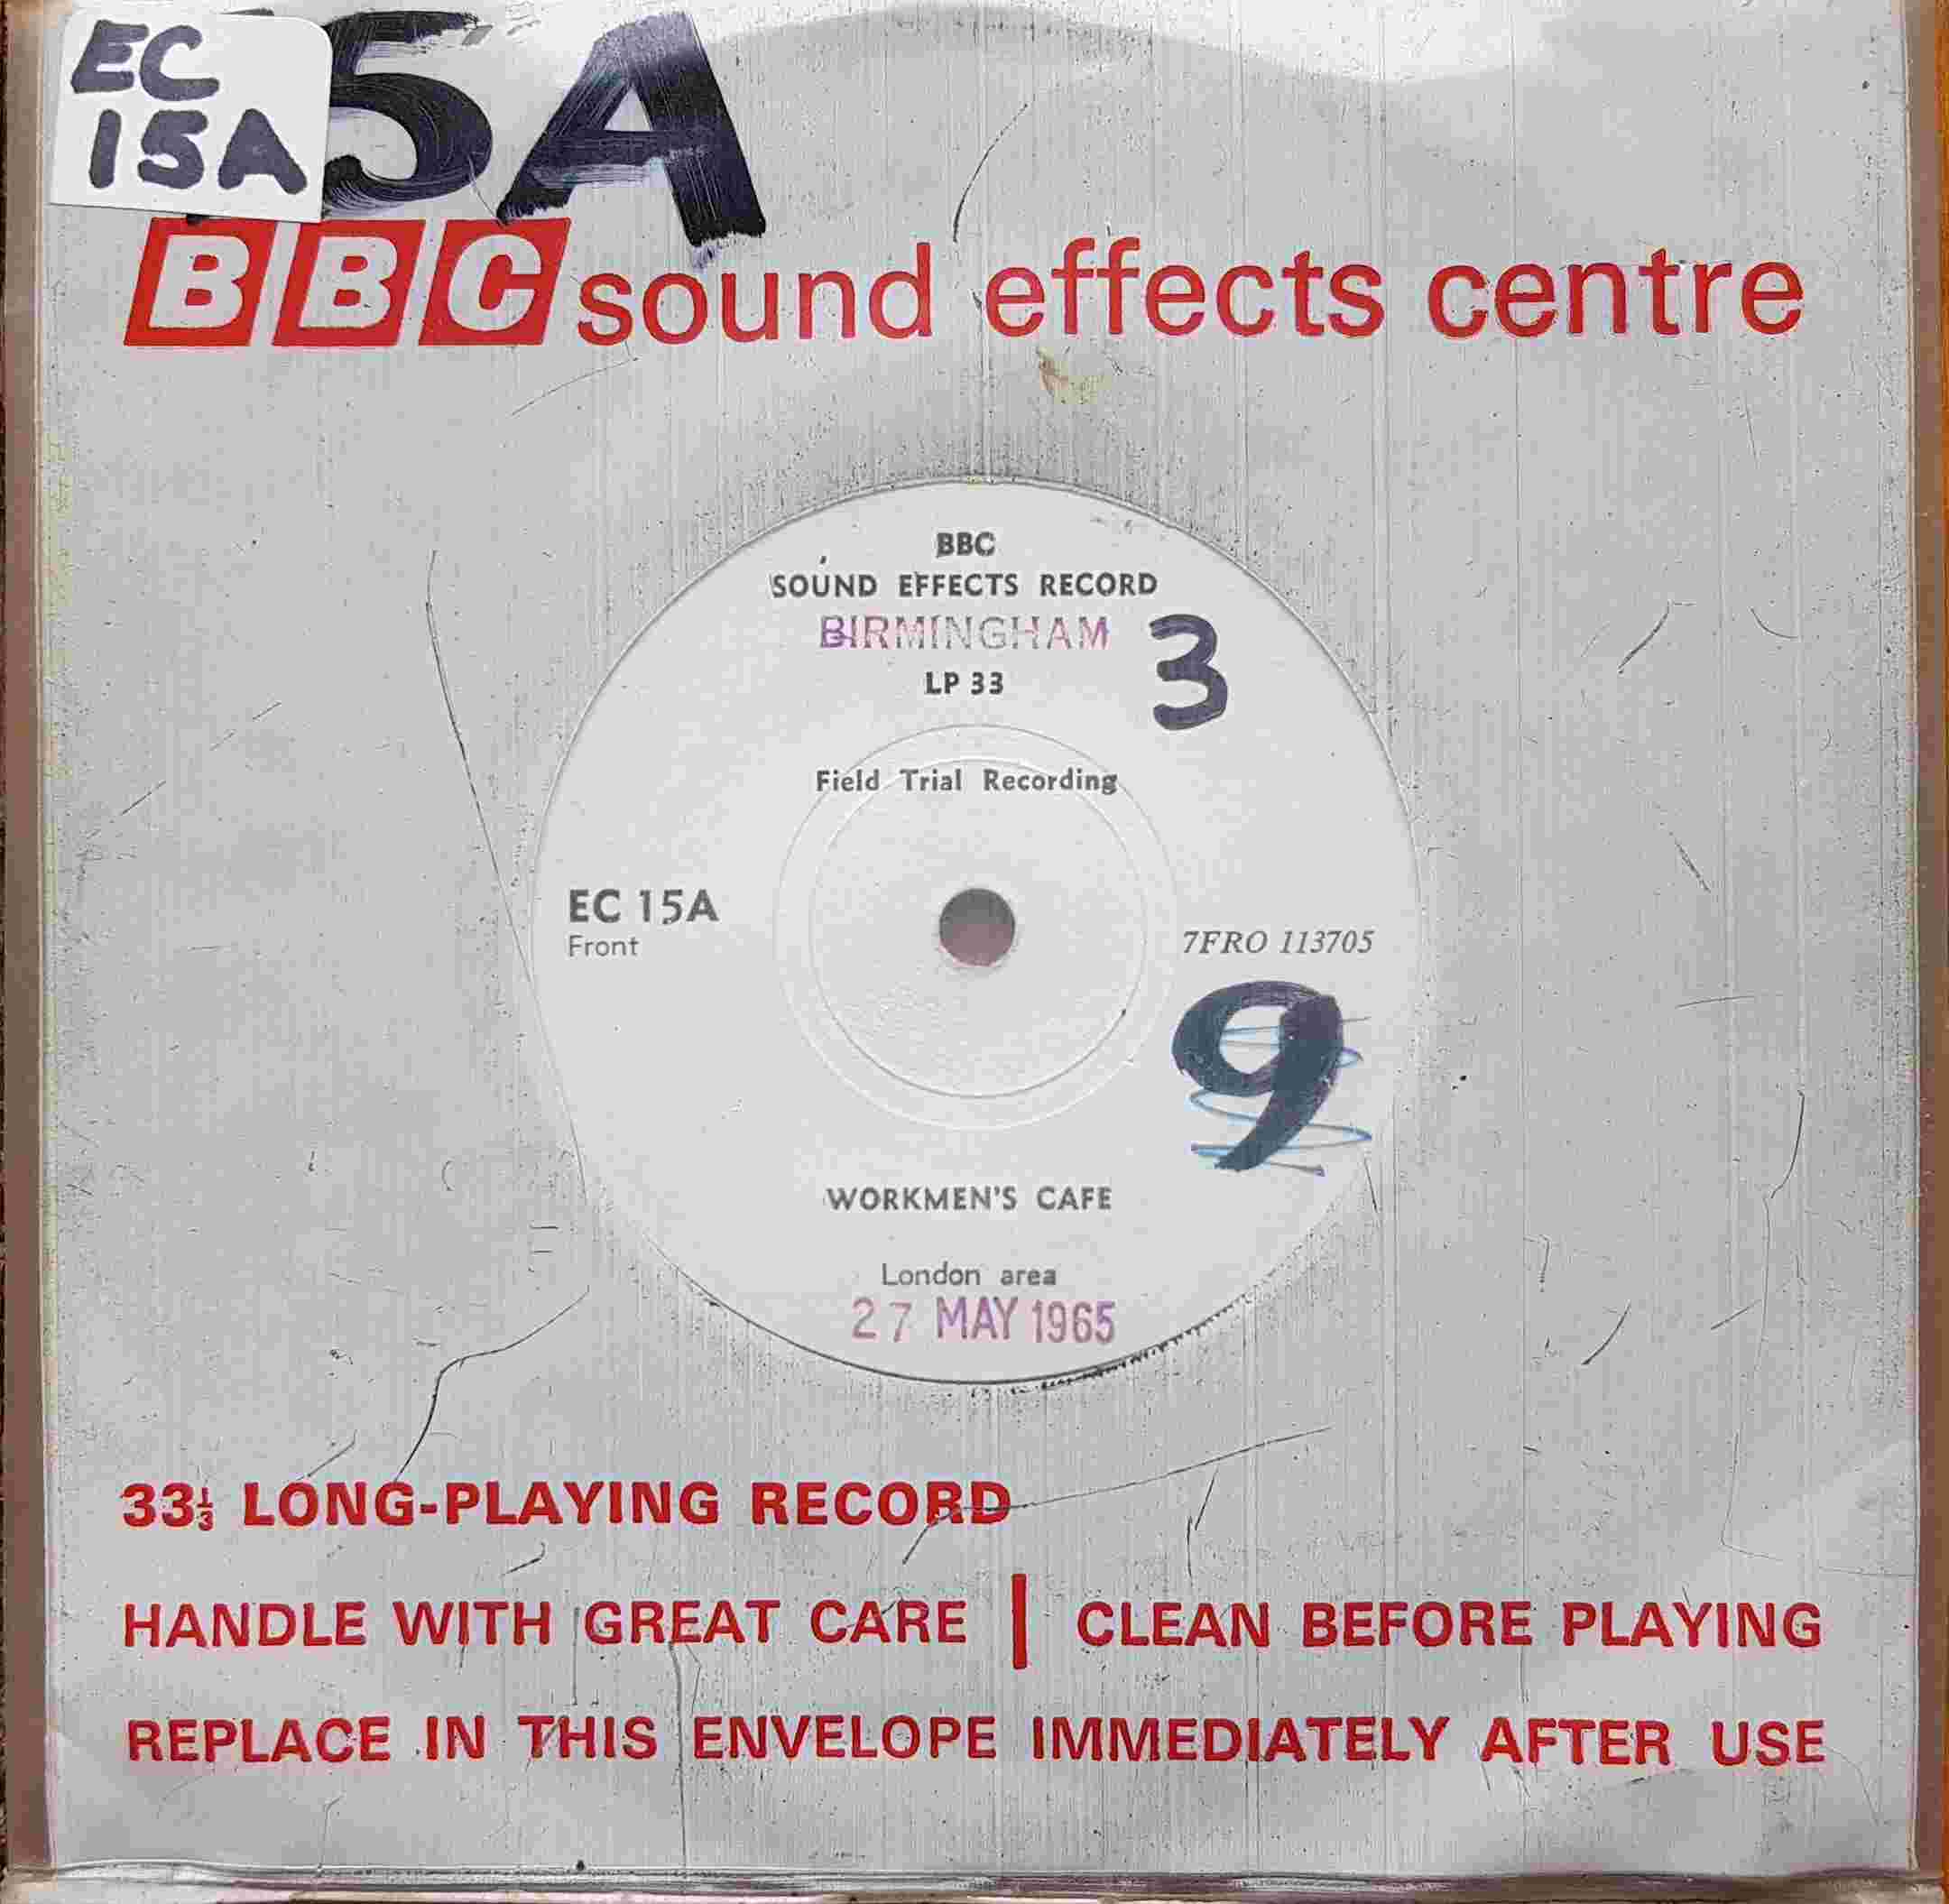 Picture of EC 15A Workmen's cafe by artist Not registered from the BBC singles - Records and Tapes library